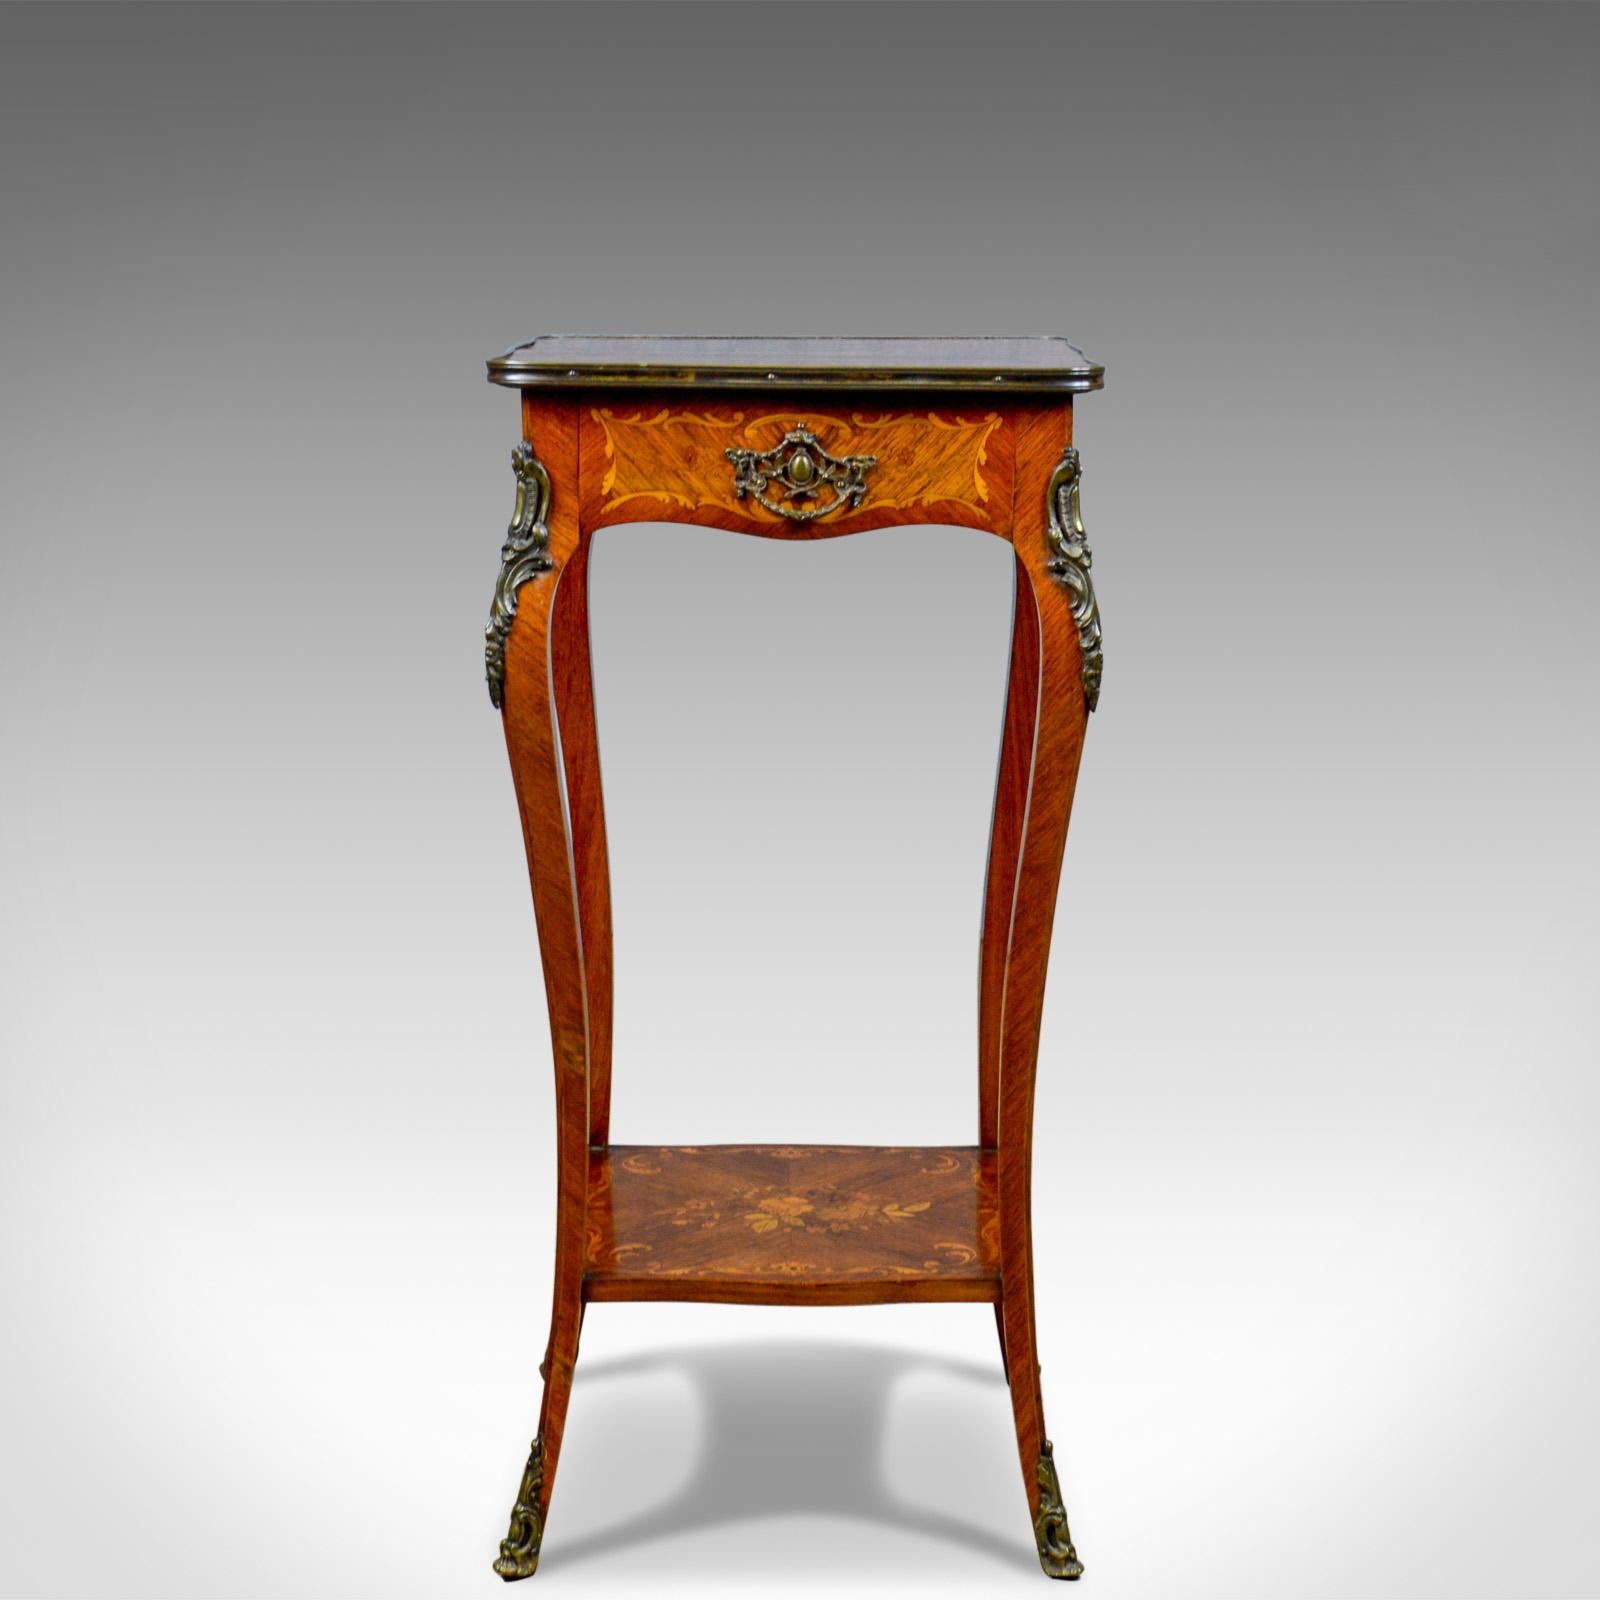 This is a French antique étagère, a kingwood side table or nightstand retailed by Druce & Co., London in the late 19th century, circa 1870.

Superior craftsmanship in the finest timbers
Rich, warm honey hues to the select kingwood 
The quarter